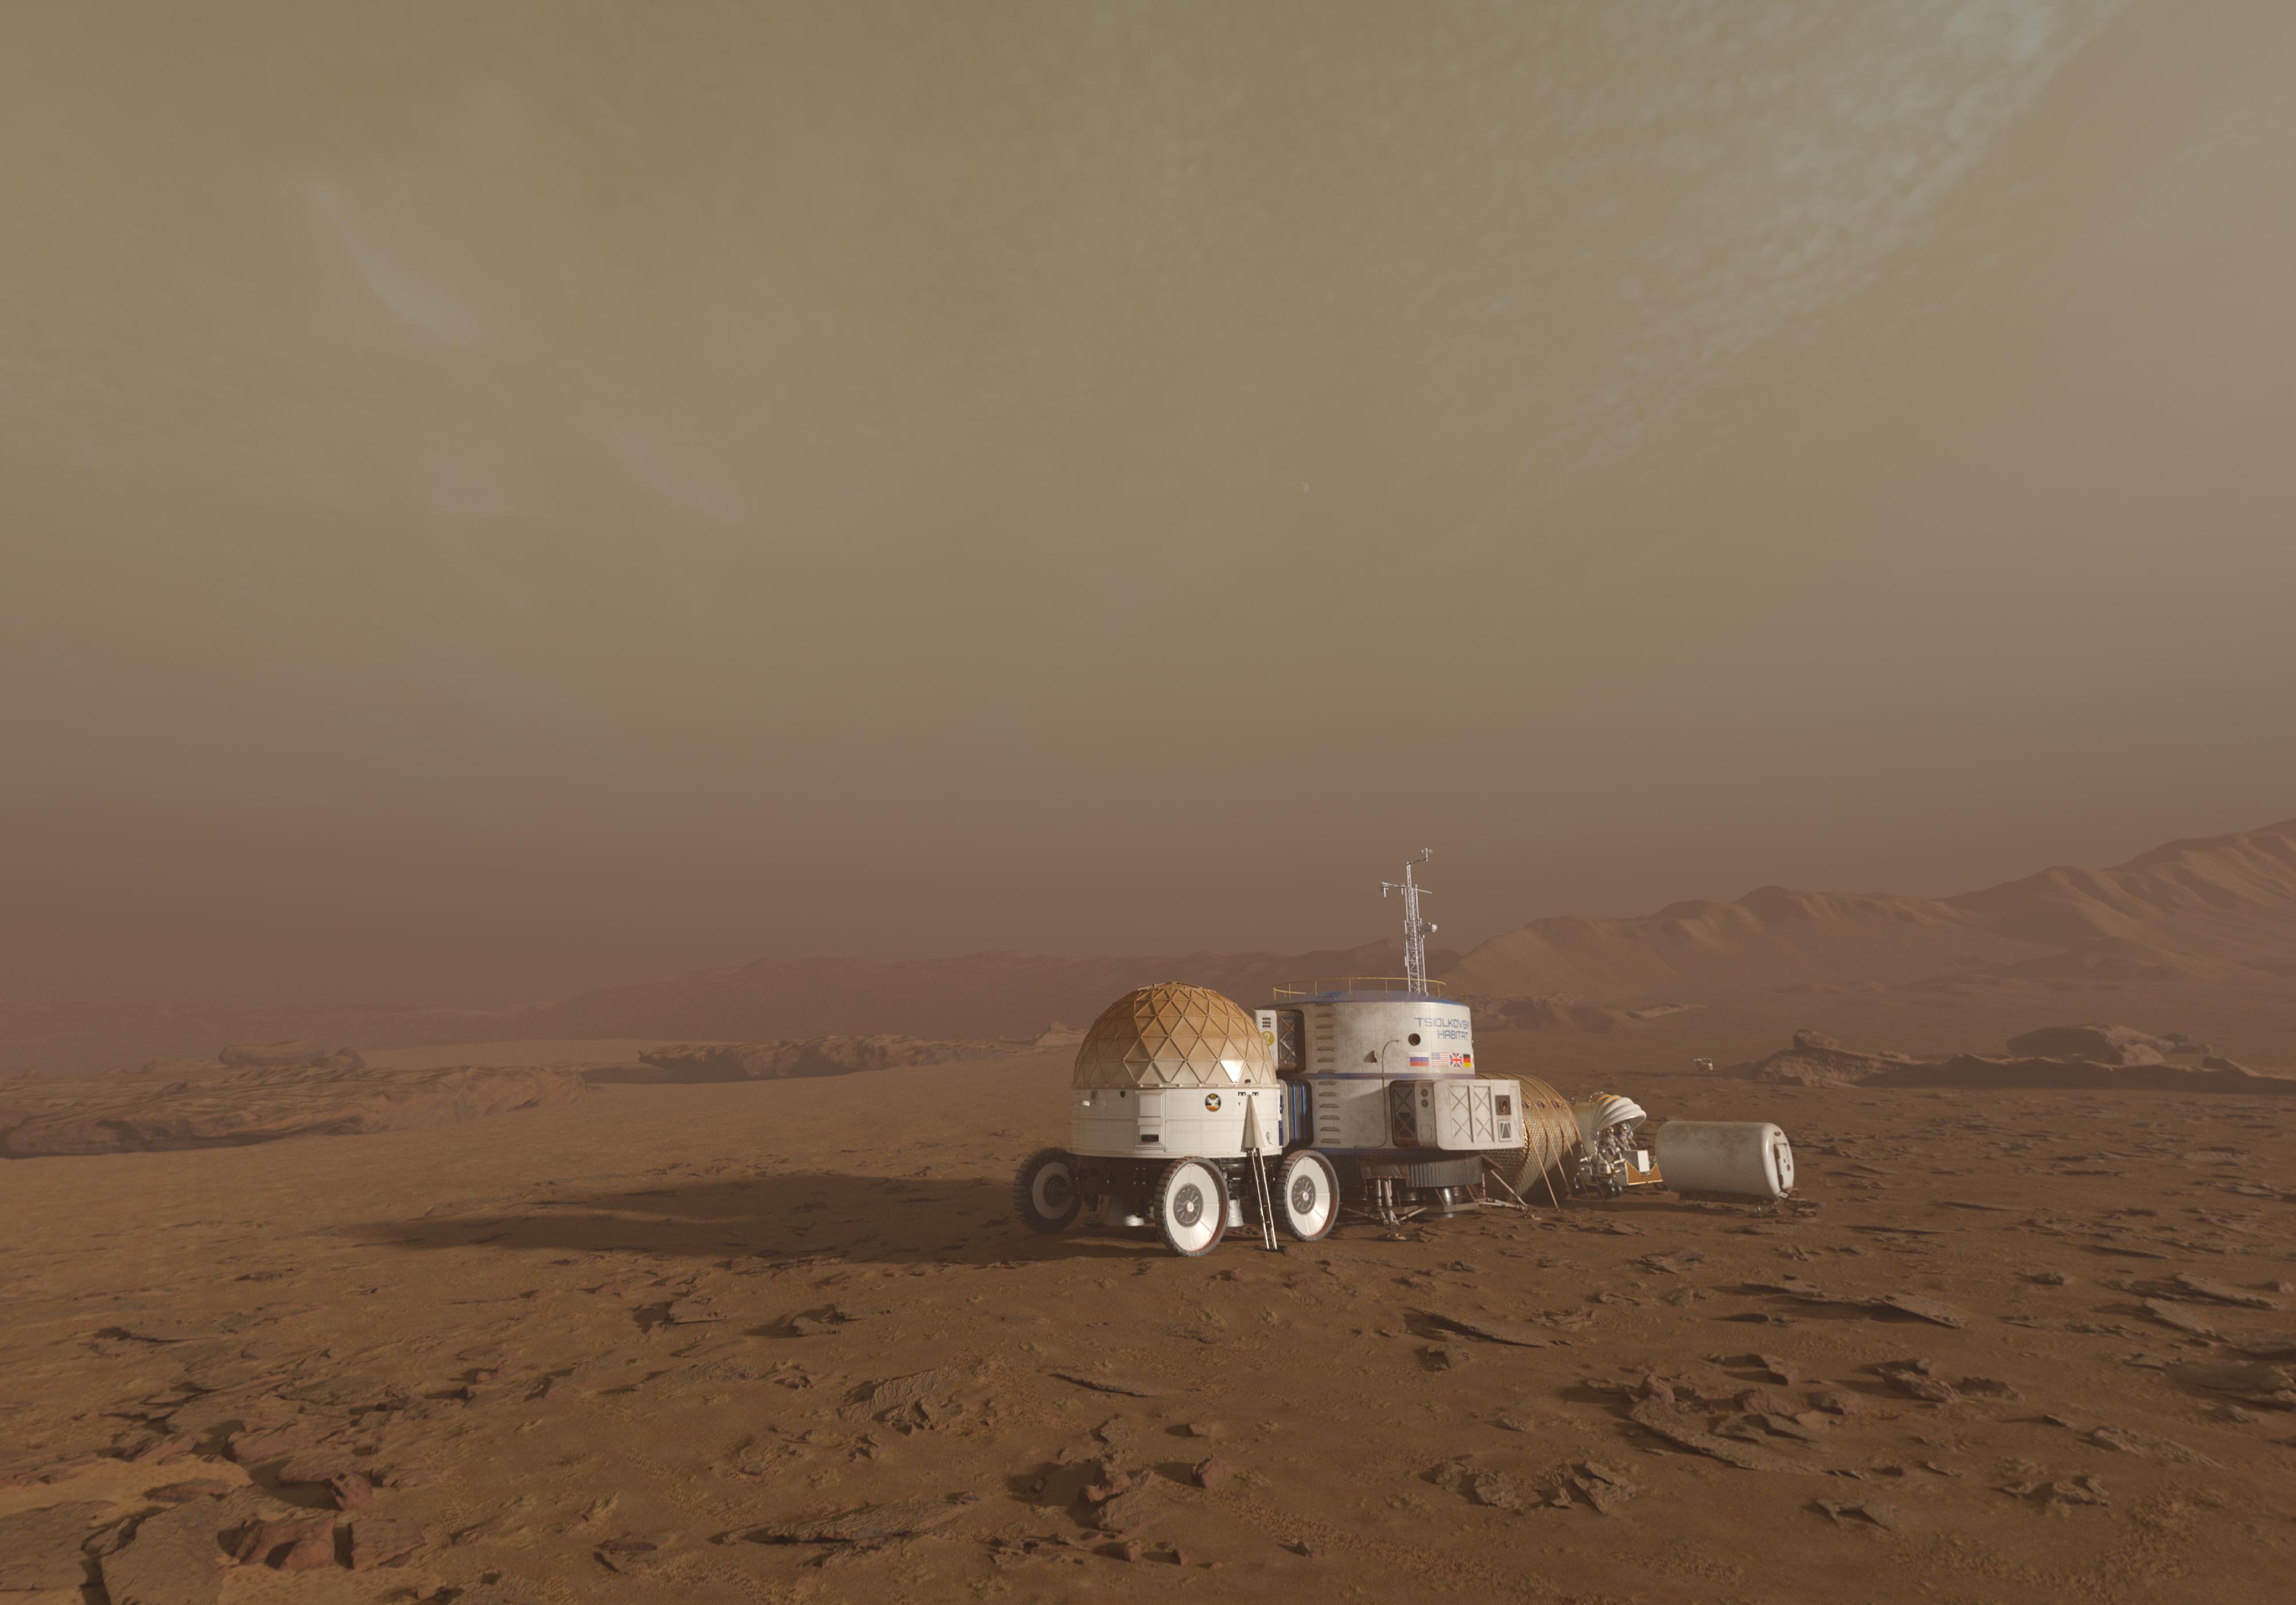 The Hong Kong Space Museum will screen a new sky show, "Mars 1001", at its Space Theatre starting May 1, enabling audiences to embark on a virtual journey that follows astronauts on a fictional 1,001-day first manned mission to explore the red planet. Picture shows the base camp of the astronauts on Mars in the show, which is built from interconnected modules. A weather station is installed on the roof of the habitation module to monitor atmospheric conditions on Mars. (Source of photo: © Mirage3D)